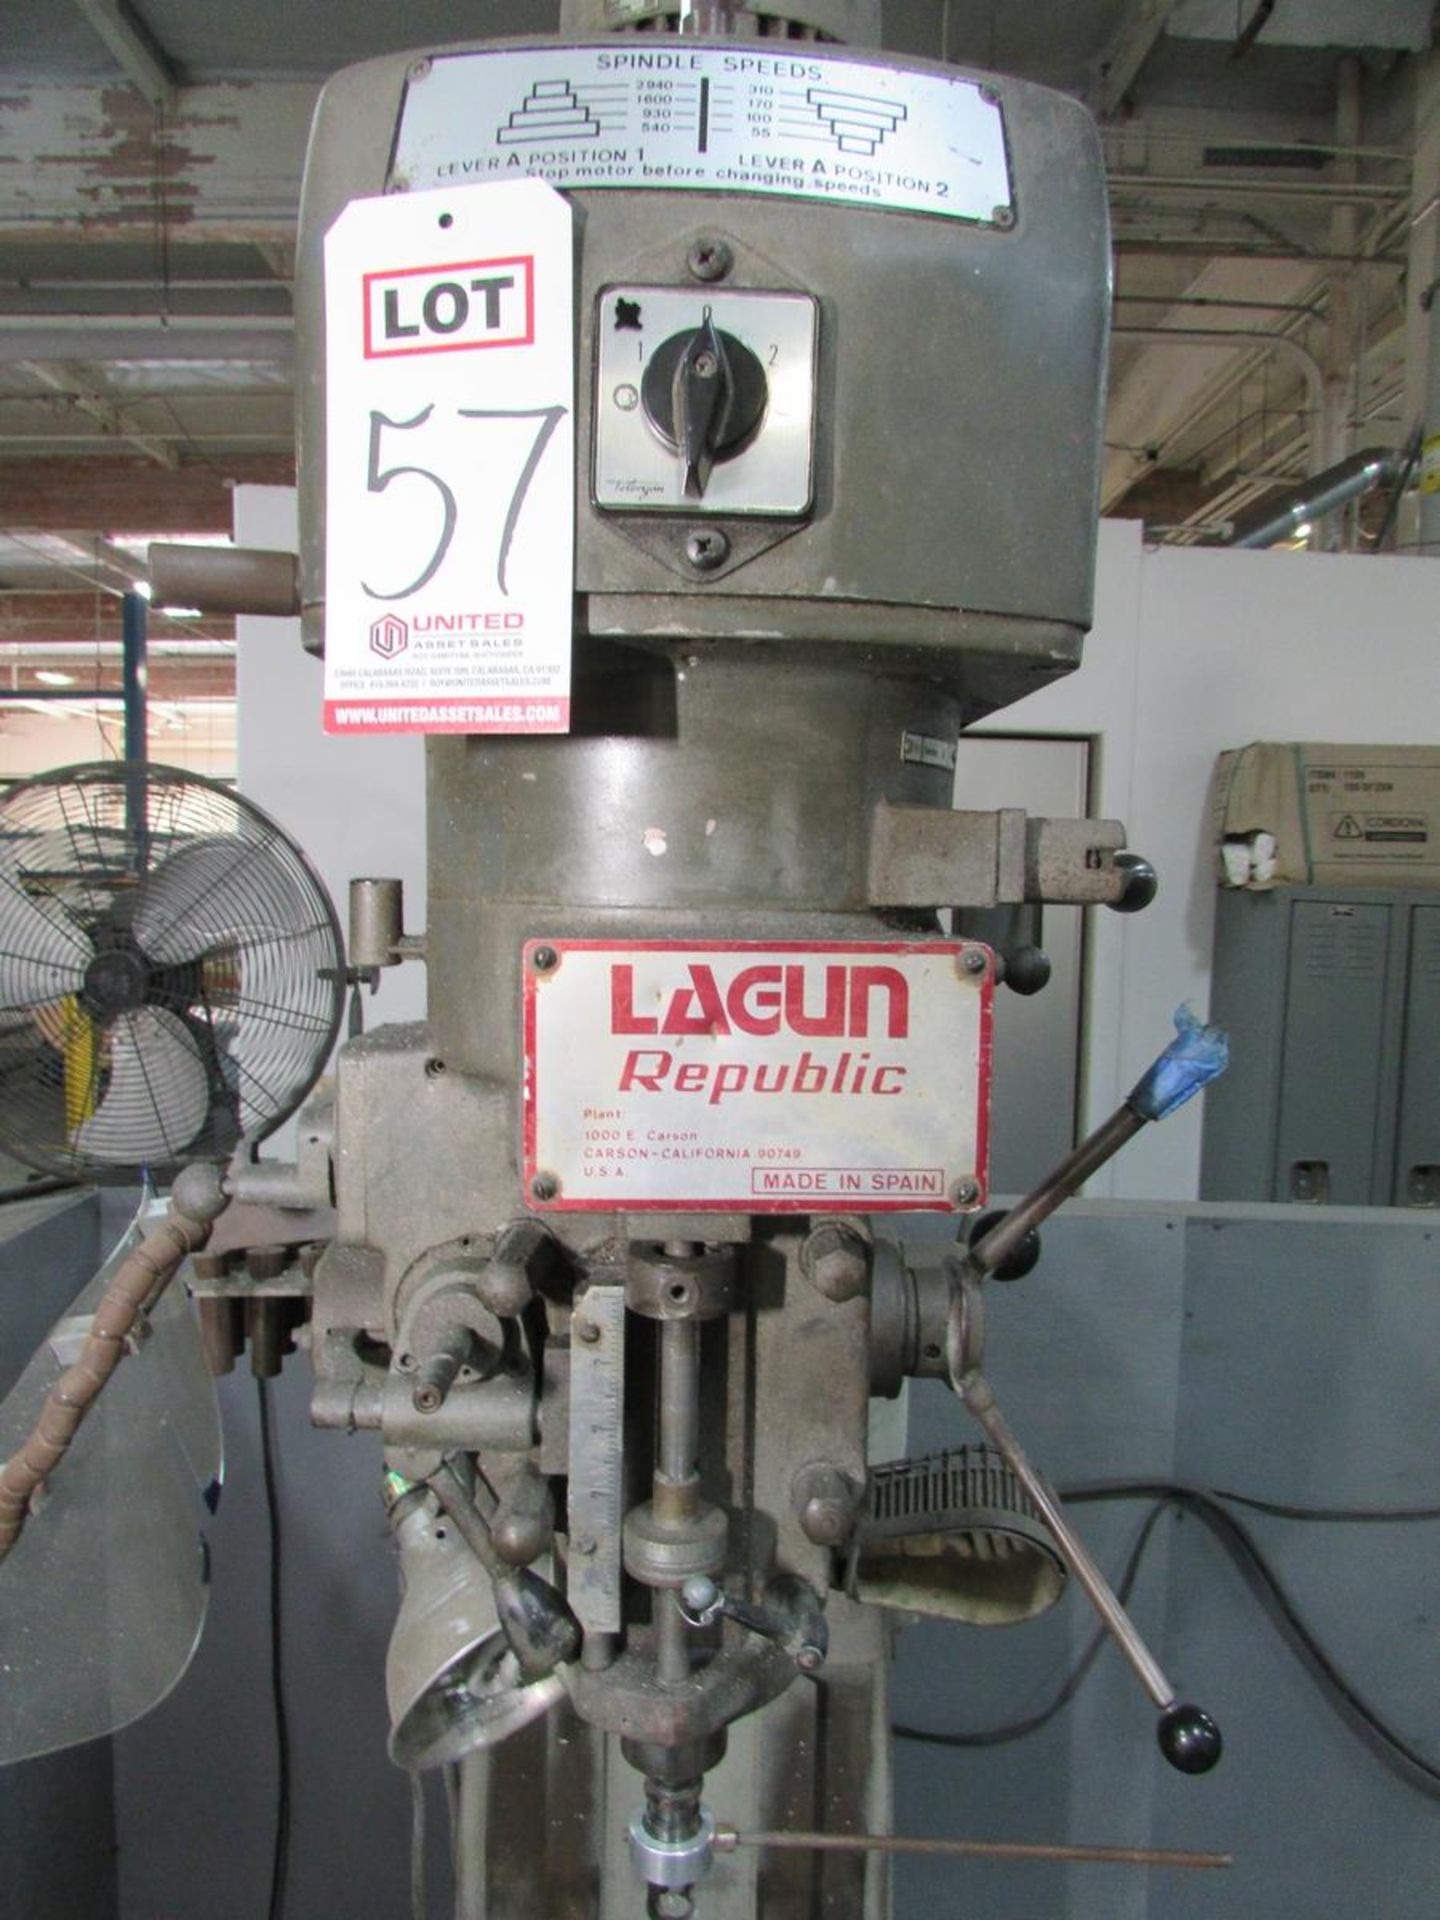 LAGUN REPUBLIC VERTICAL MILLING MACHINE, 50" X 10" T-SLOTTED TABLE, 5" QUILL STROKE, 55-2940 RPM - Image 5 of 13